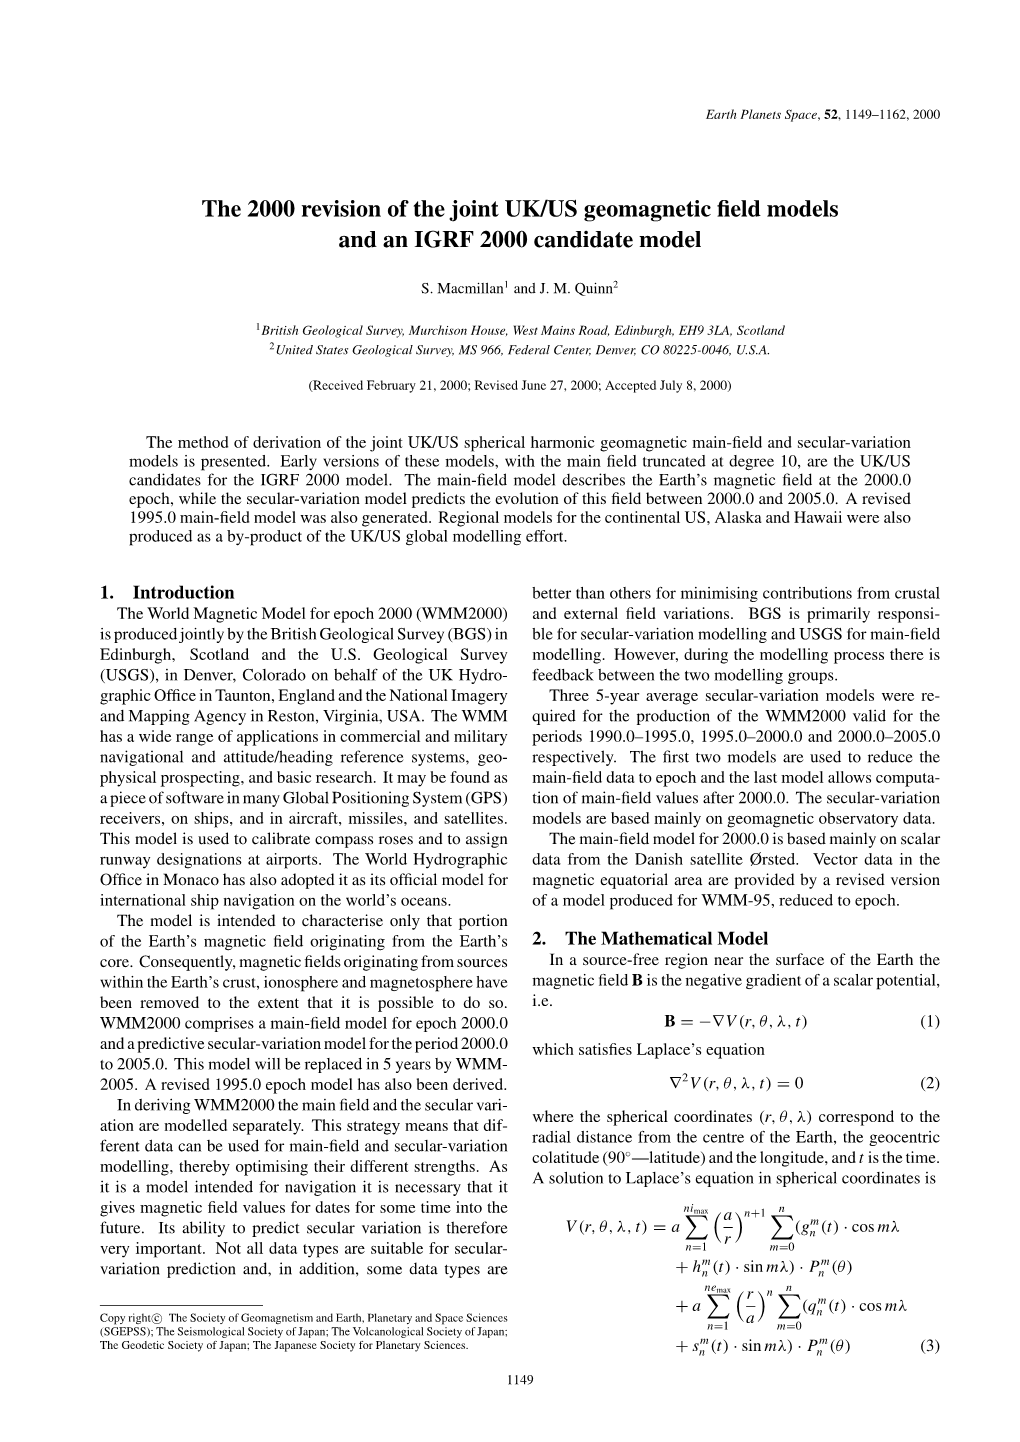 The 2000 Revision of the Joint UK/US Geomagnetic Field Models and An